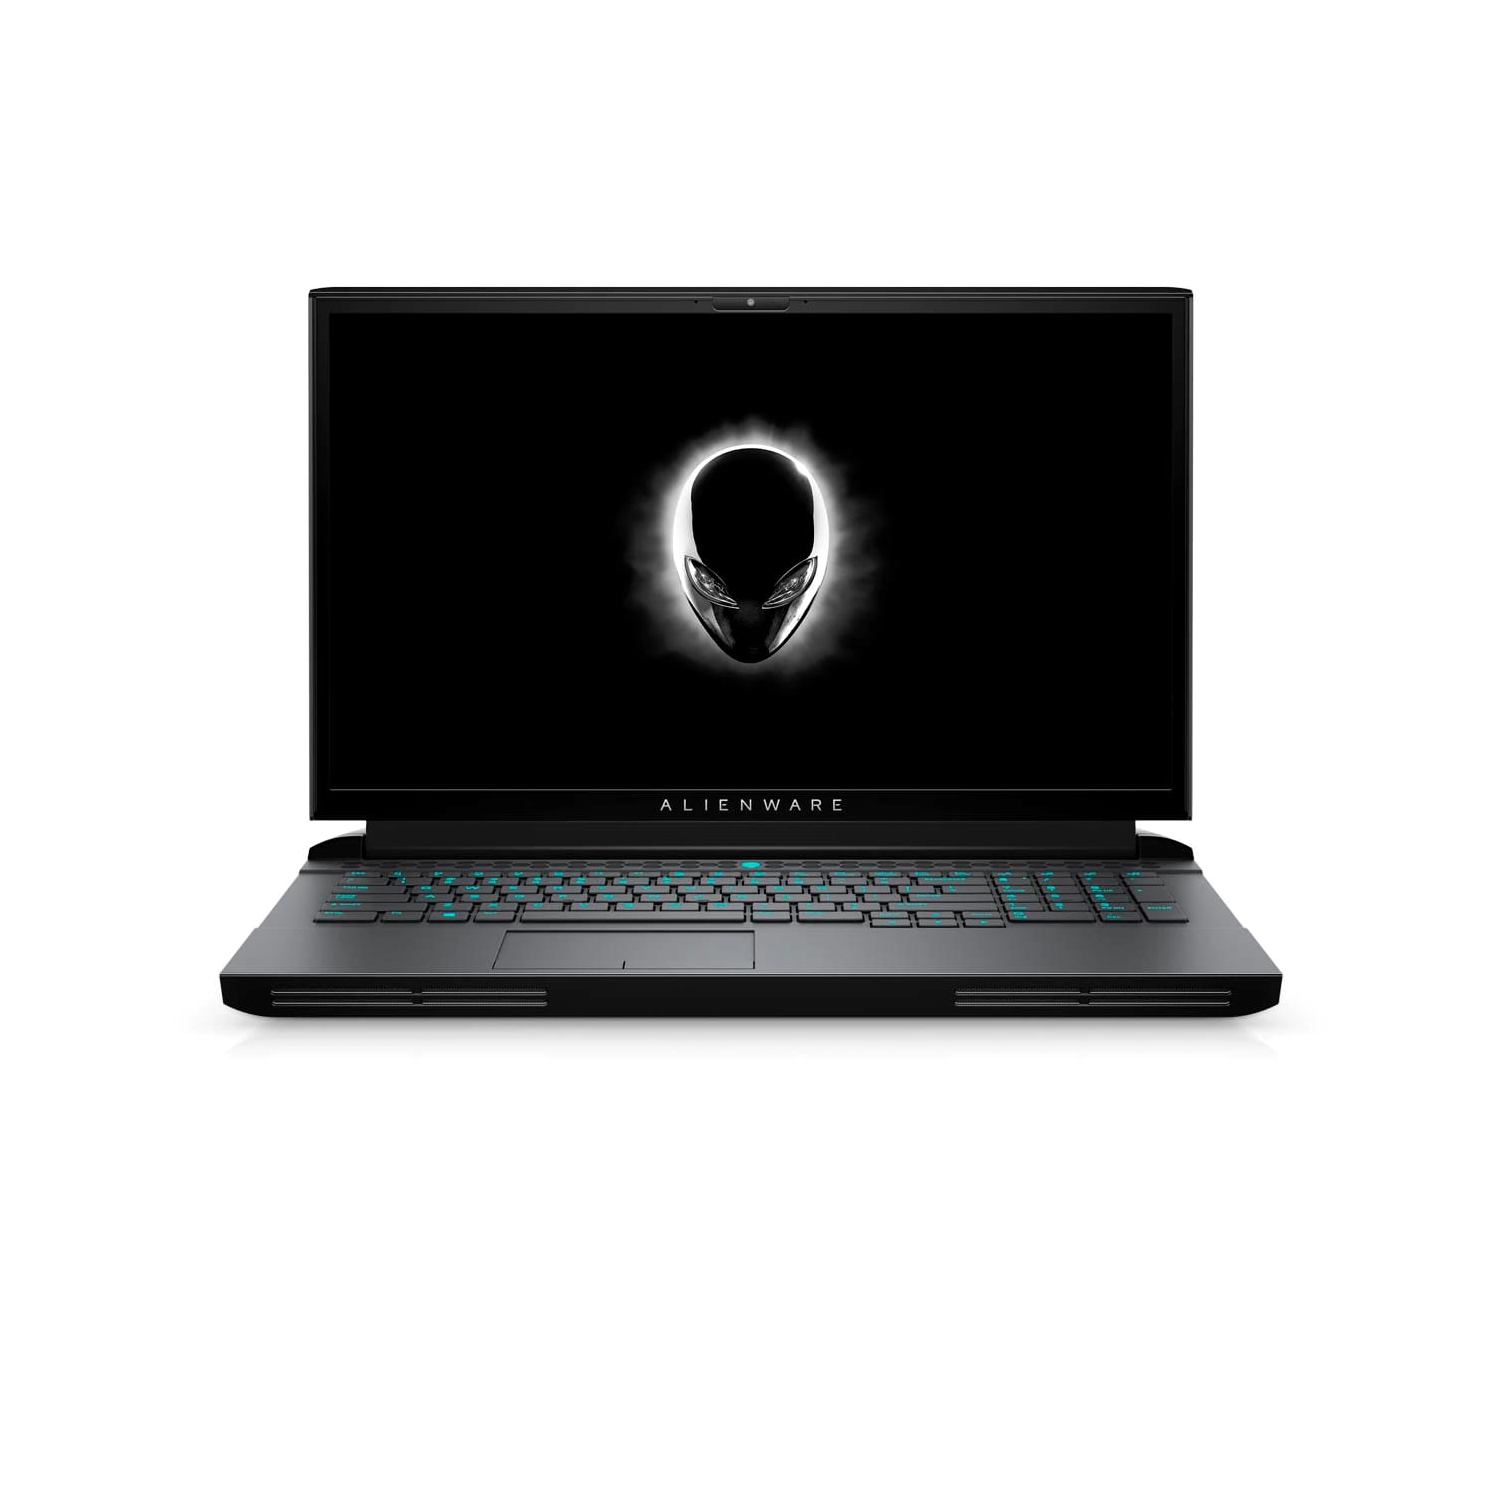 Refurbished (Excellent) - Dell Alienware 17 51m R2 Gaming Laptop (2020), 17.3" FHD, Core i7, 256GB SSD + 256GB SSD, 16GB RAM, 2070 Super, 5.1 GHz, 10th Gen CPU Certified